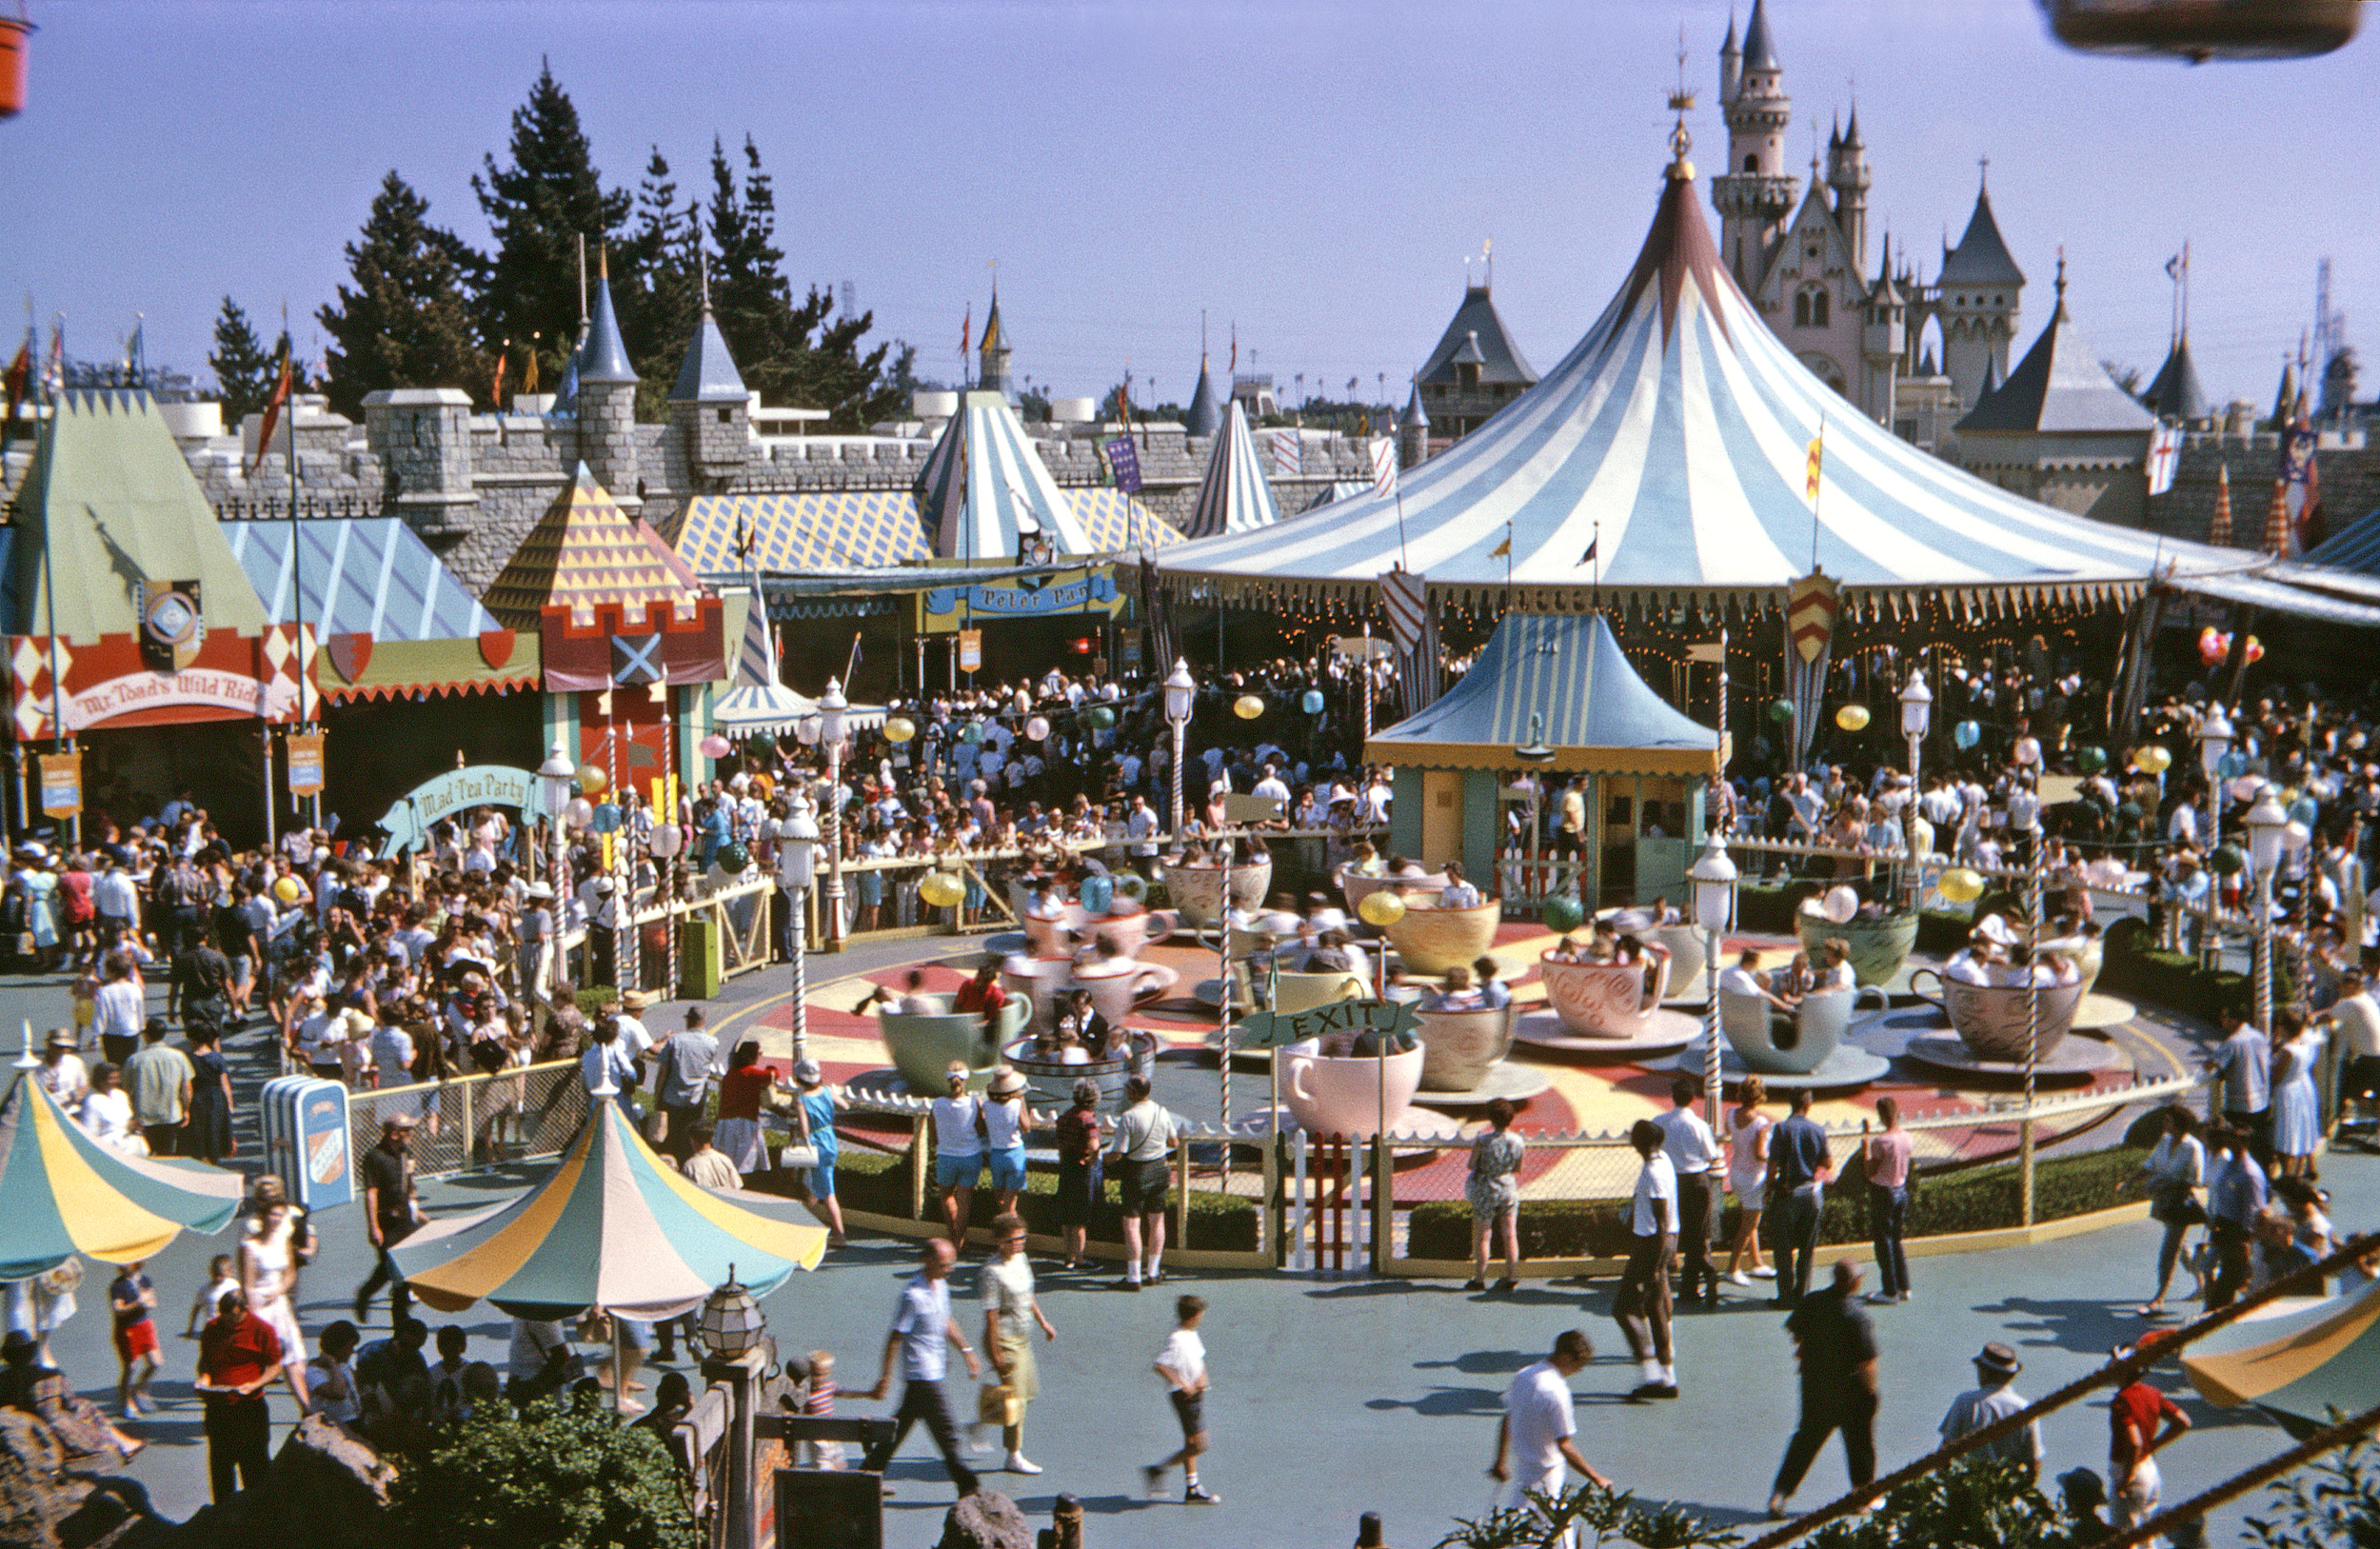 Kennedy-era folks at Disneyland in Kodachrome. Should I go on here about how thoroughly obsessed I was with Disneyland in the 1960s? At first I ached to go there just to drive the Autopia cars. The real fixation started after my first visit in 1960. It was like another world -- actually, a multitude of other worlds, all of them ones I'd rather live in. That being not quite possible, I settled for the next best thing: bring it into my real life. I organized the hundreds of color slides I took into elaborate shows with music and even printed programs. I drew and painted Disneyland artwork. I dubbed my cactus garden "The Living Desert" and tape-recorded a narration for walks through it. I built my own Storybook Land in one corner of our garden, and a diorama in the basement. I insisted we start having our Sunday dinners in the dining room so I could wheel the TV set around in order to watch  The Wonderful World of Color -- in black-and-white. I sent an inquiry about employment in the park, but they weren't hiring teenagers who lived 400 miles away. Even now I think I'd really like to live there, or at least the one of the 50s and 60s. Must be a Peter Pan complex. View full size.